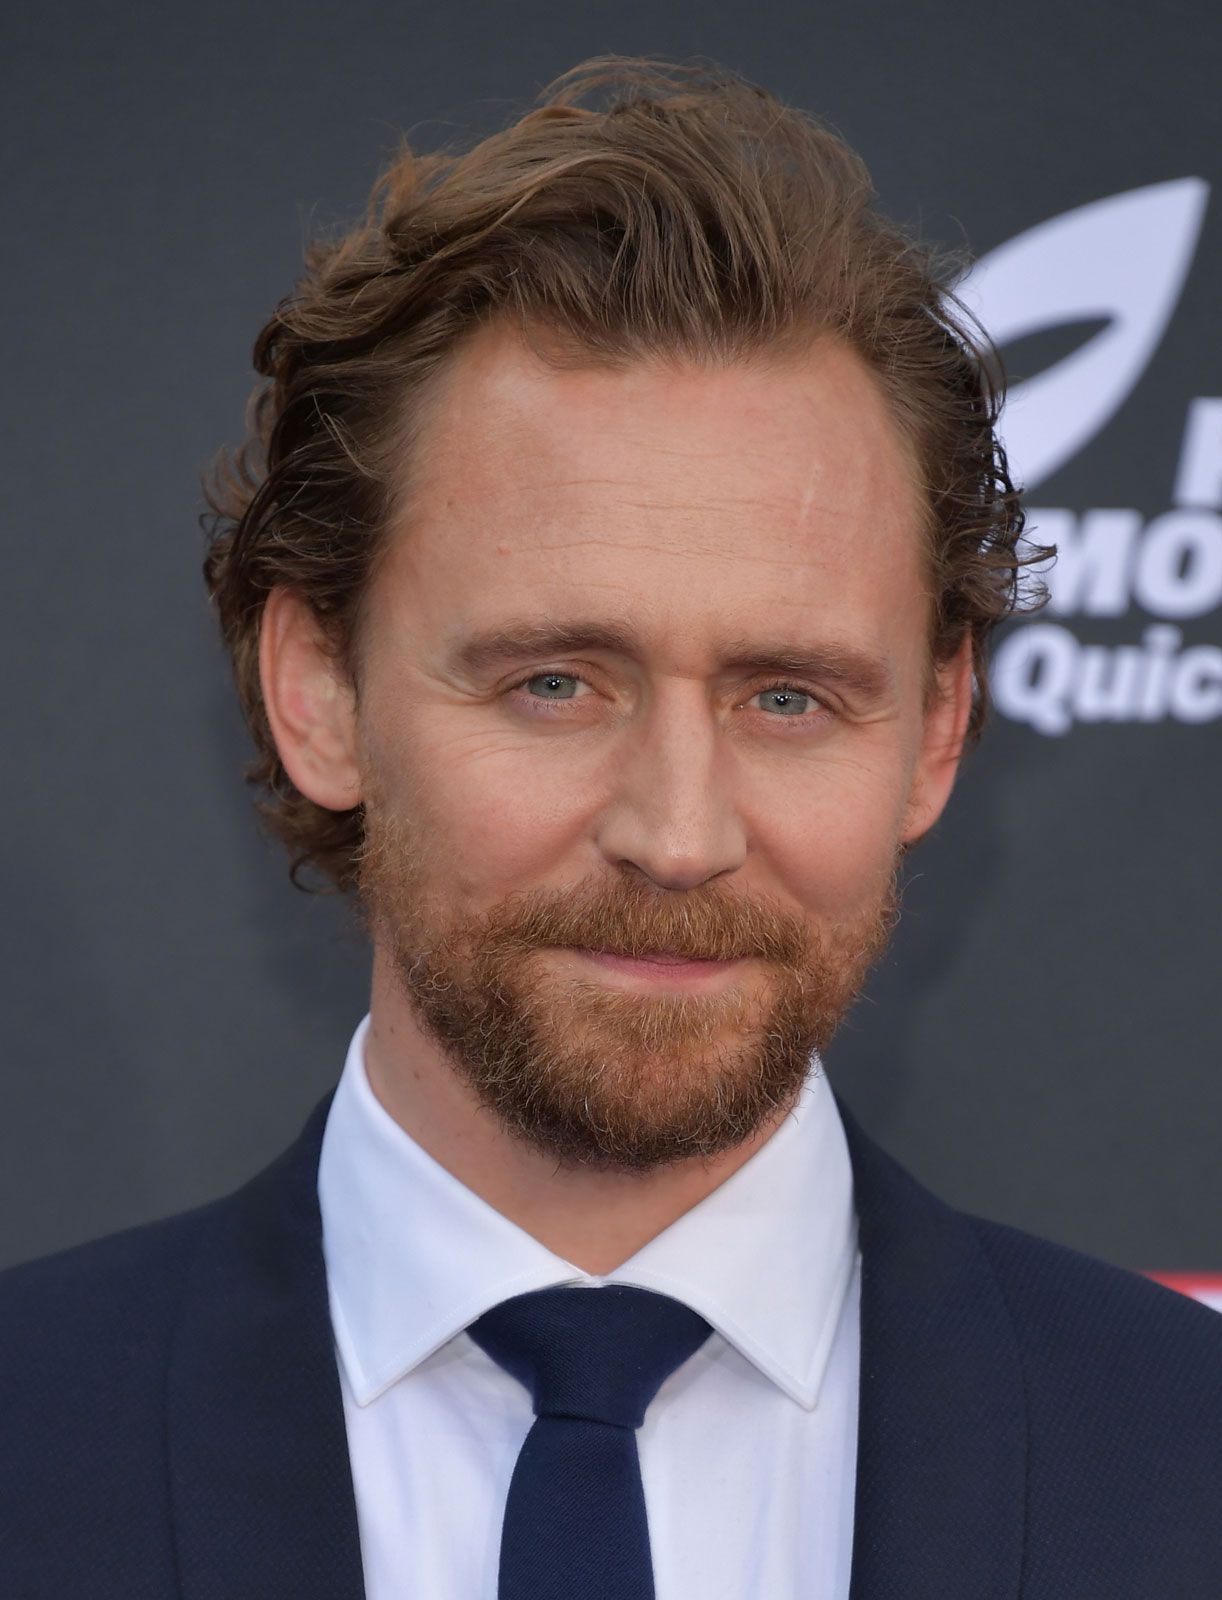 Stephen King Adaptation ‘The Life Of Chuck’ to Star Tom Hiddleston and Mark Hamill